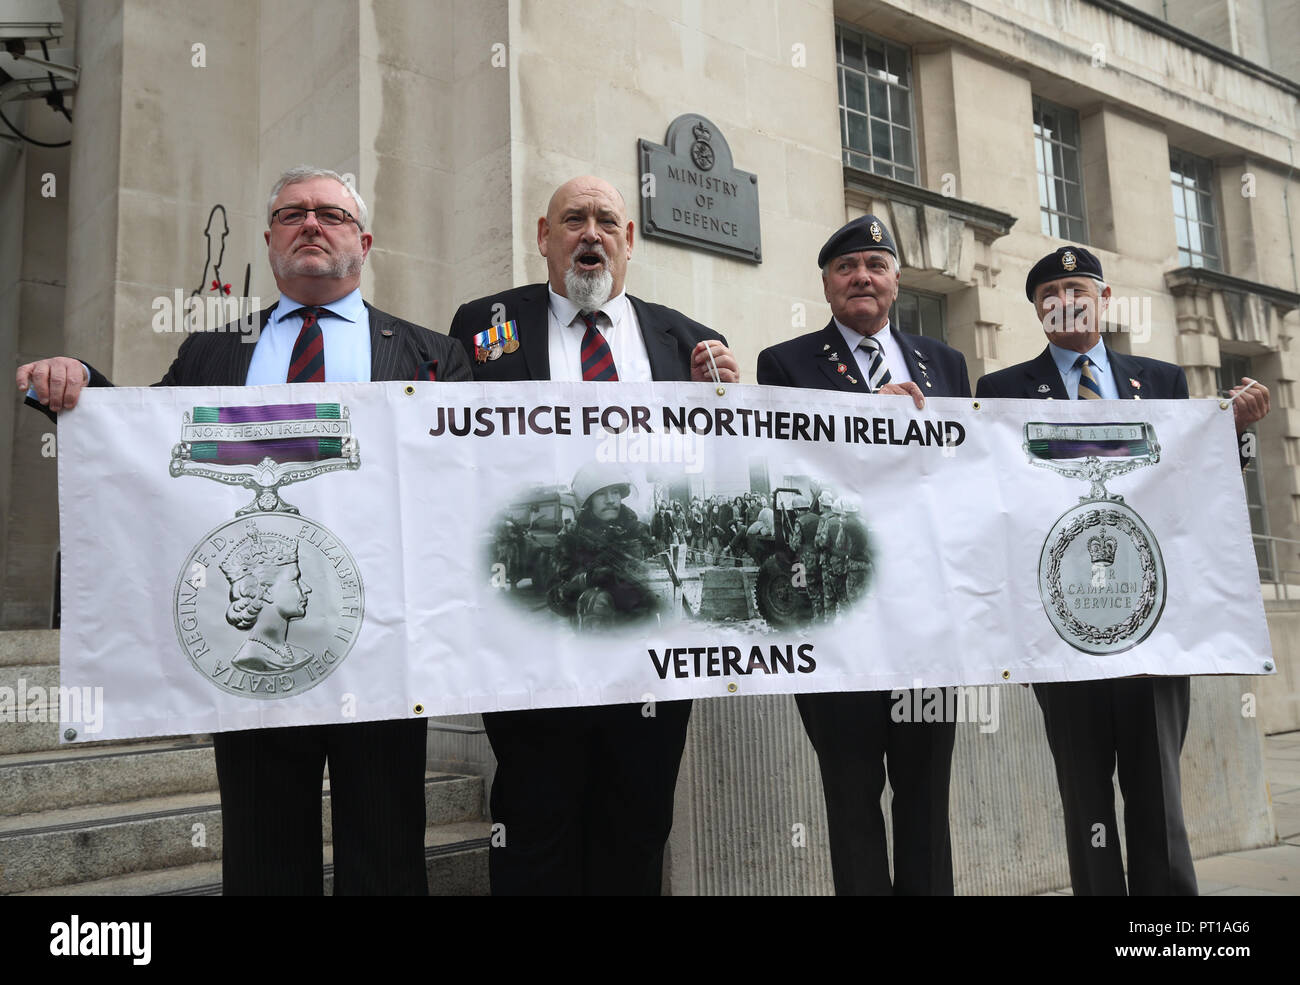 Veterans (left to right) Alan Barry, Roy Brinkley, Michael Burke and Peter White protesting outside the Ministry of Defence in Whitehall, London, against investigations into troops who fought in during the Troubles in Northern Ireland. Stock Photo